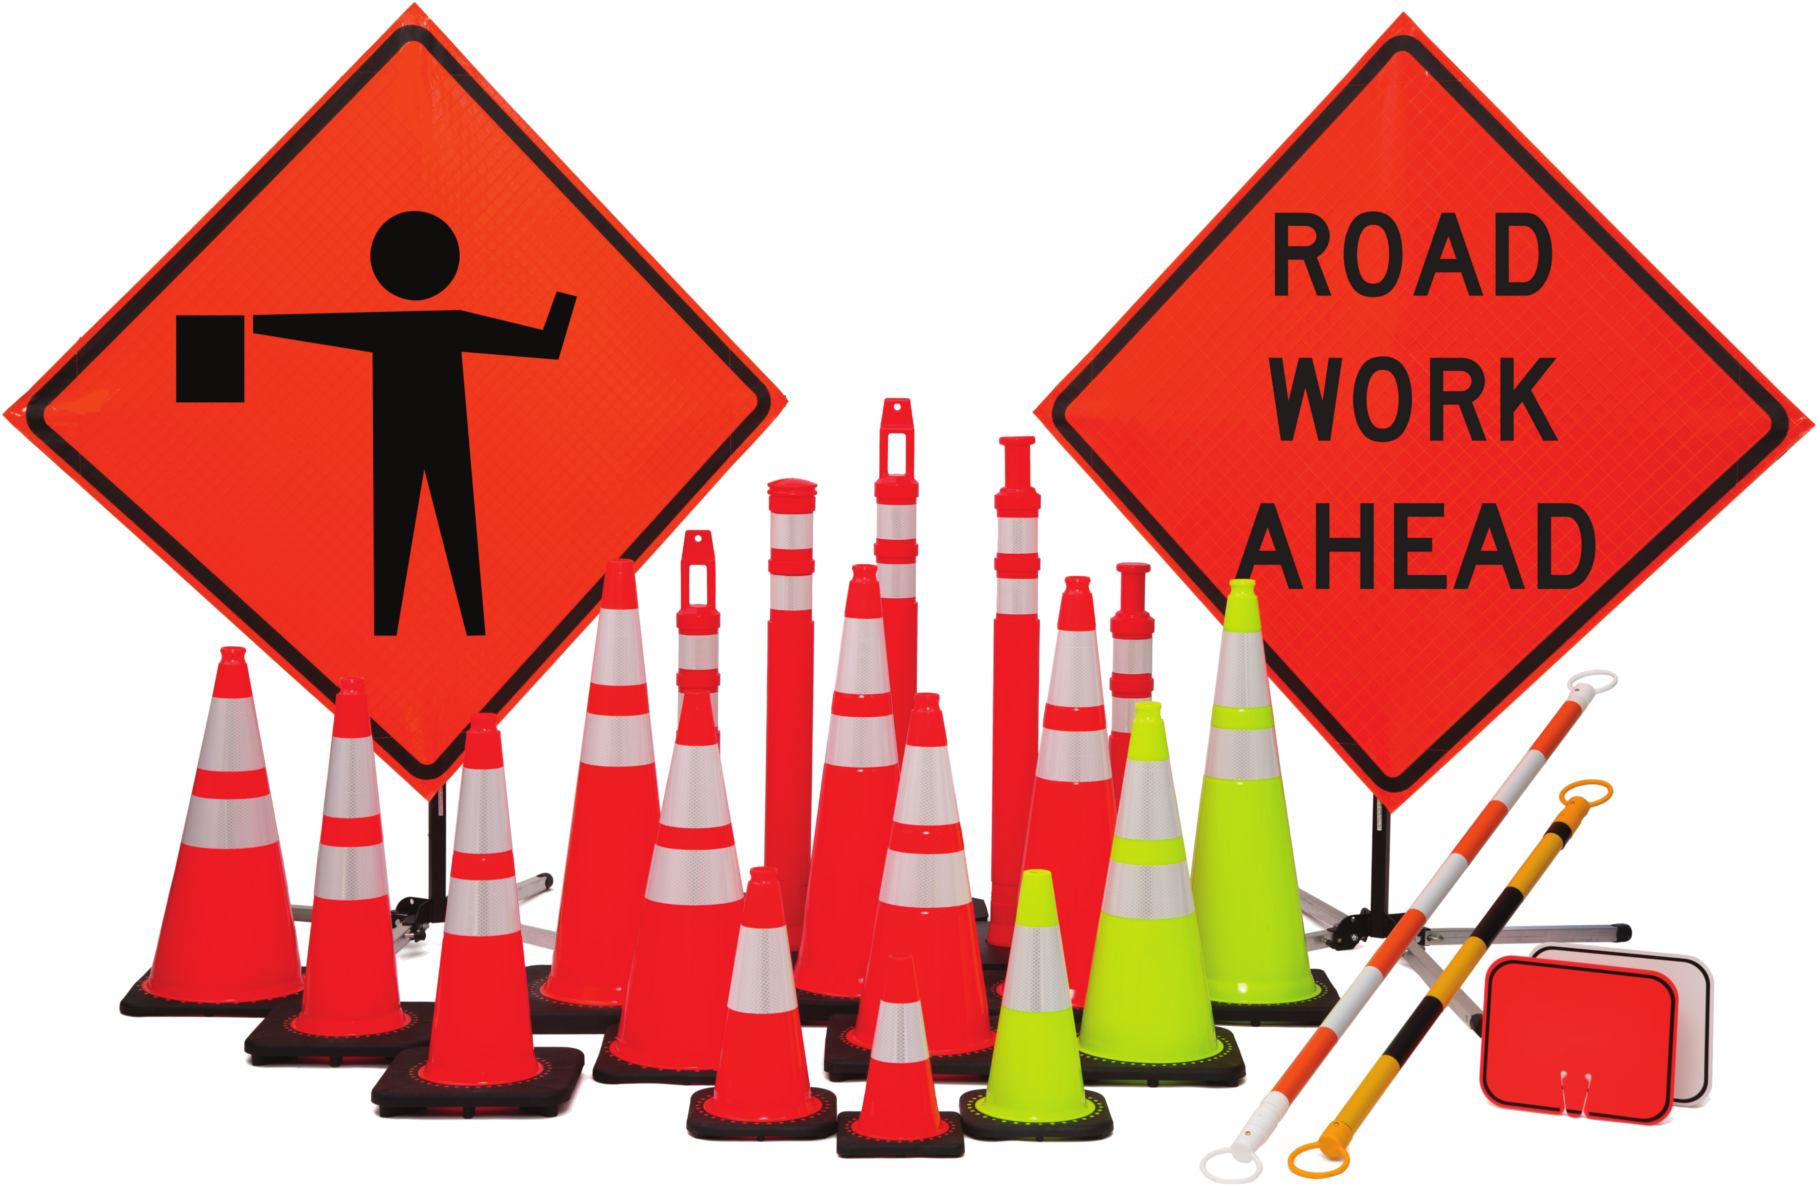 Familyproduct - Road Work Ahead Sign (2000x1323)